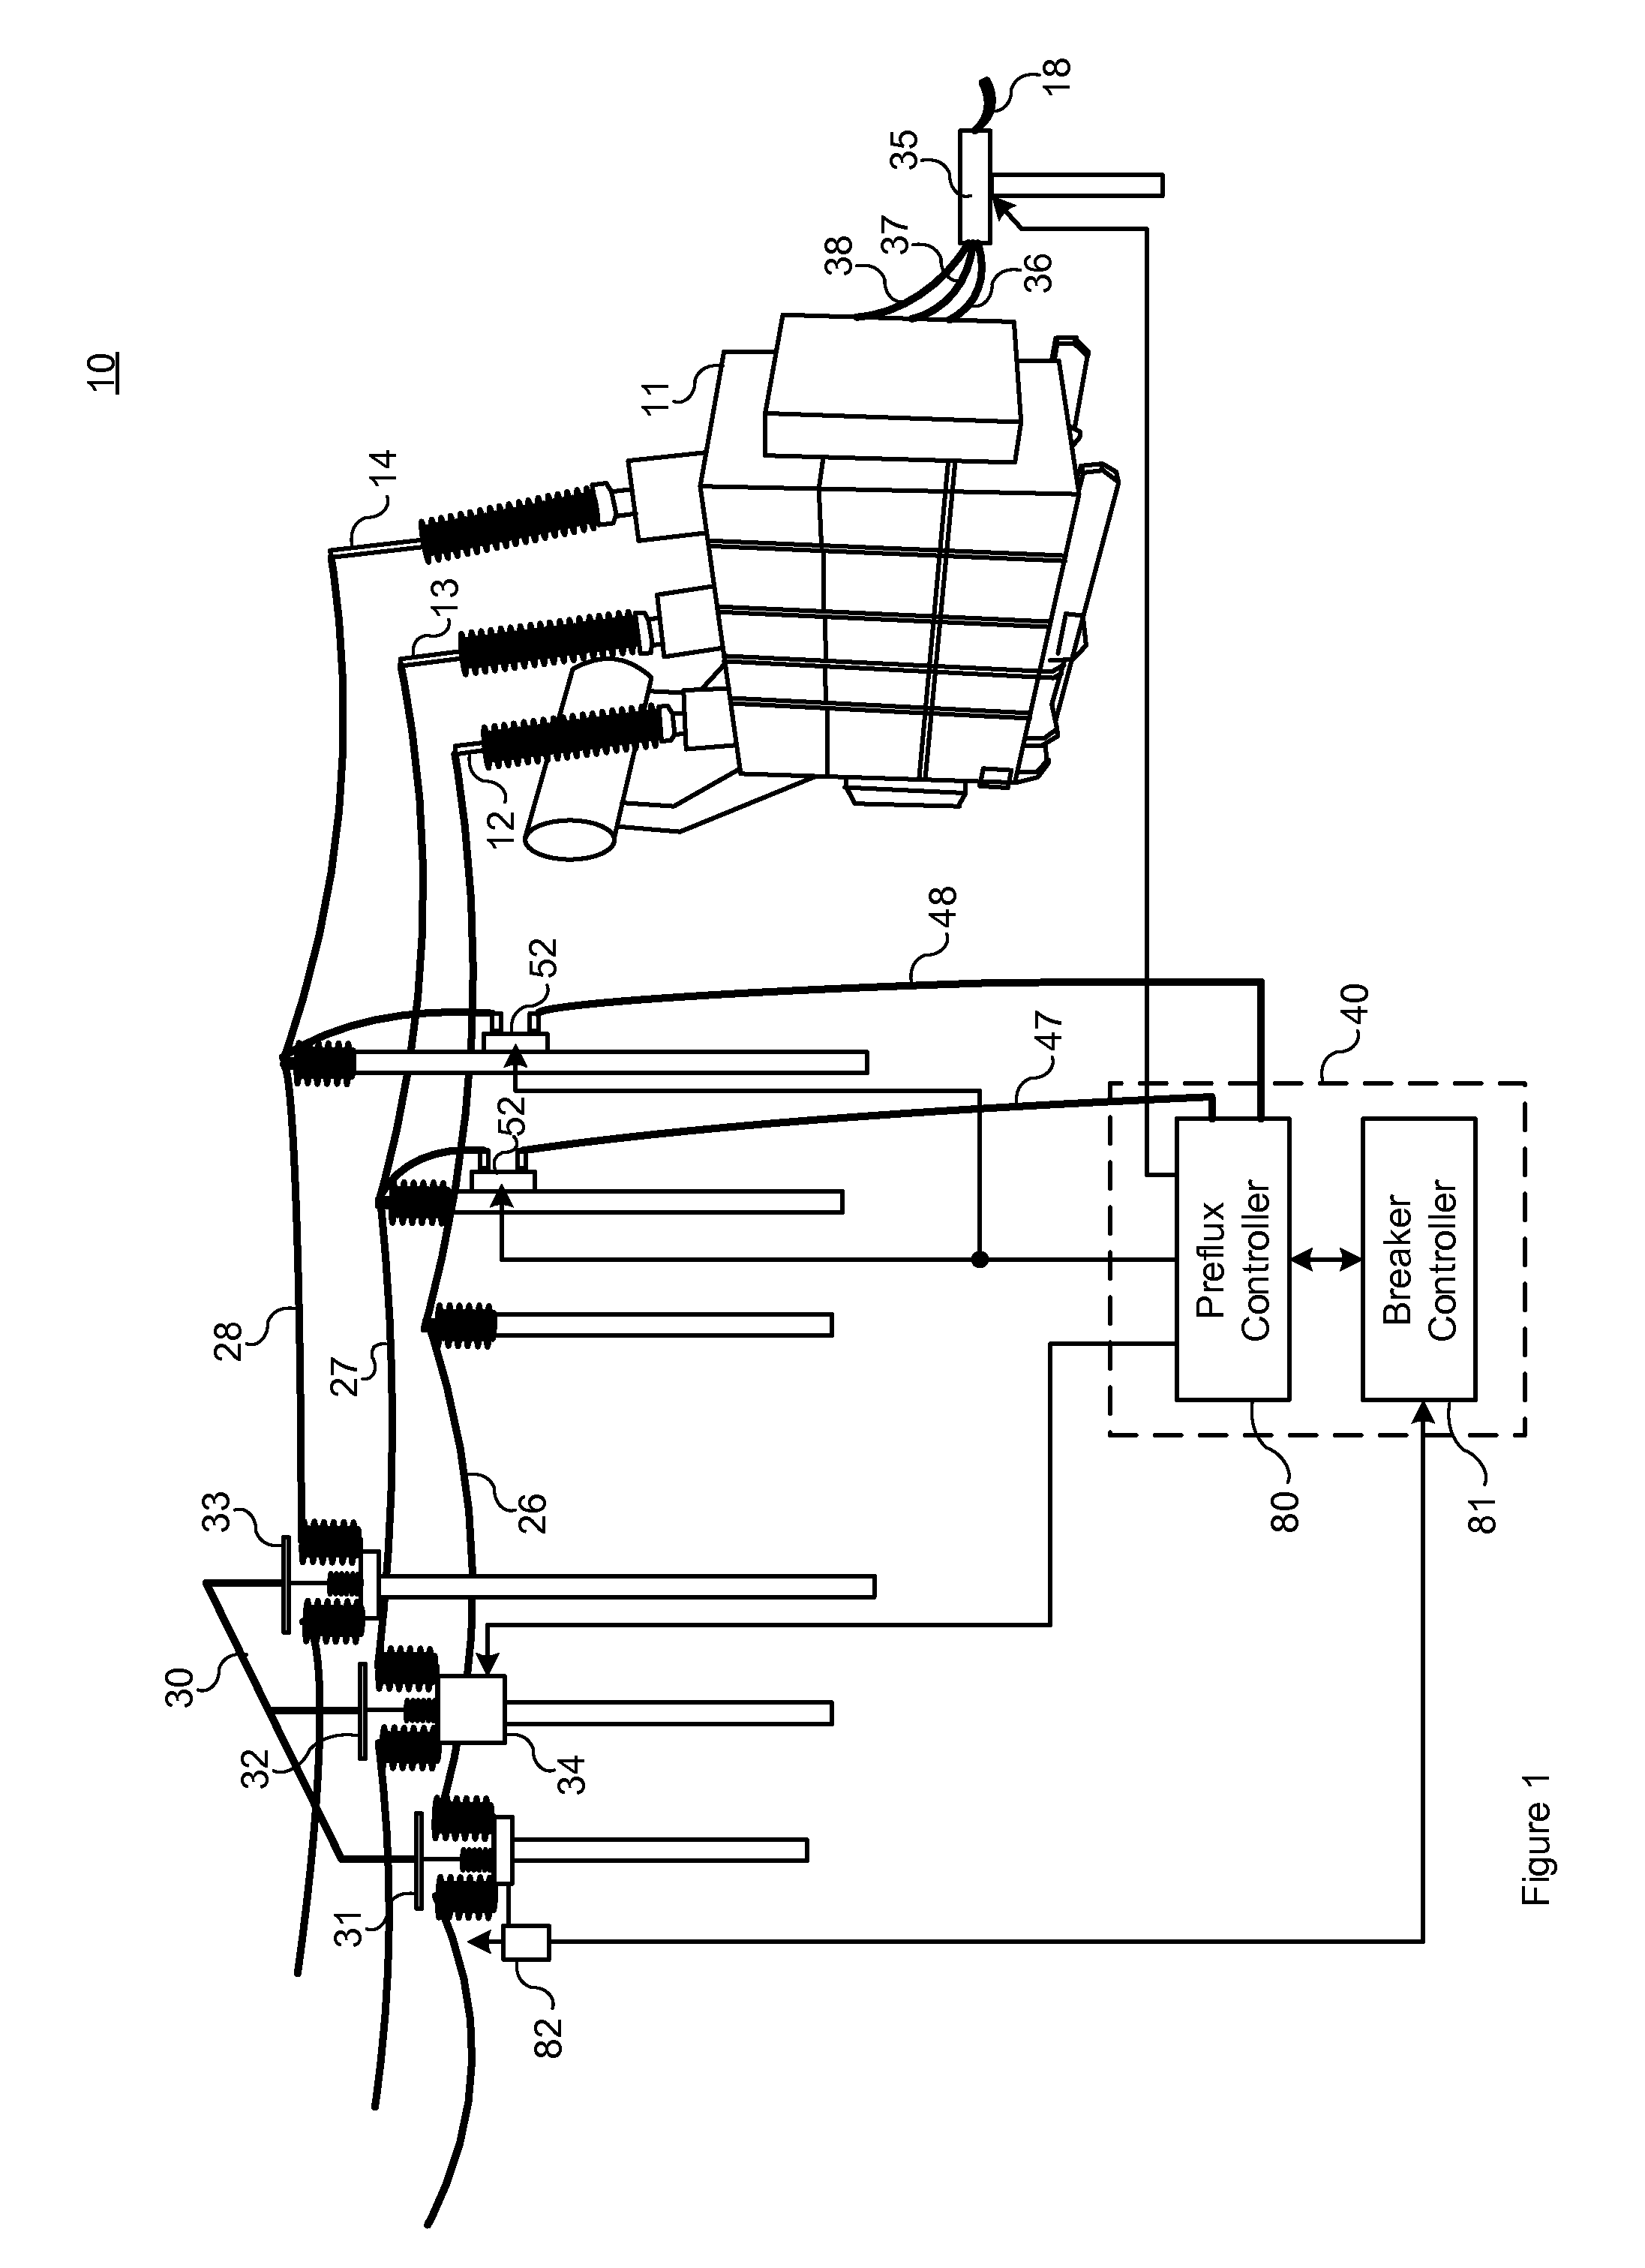 System, apparatus, and method for reducing inrush current in a transformer